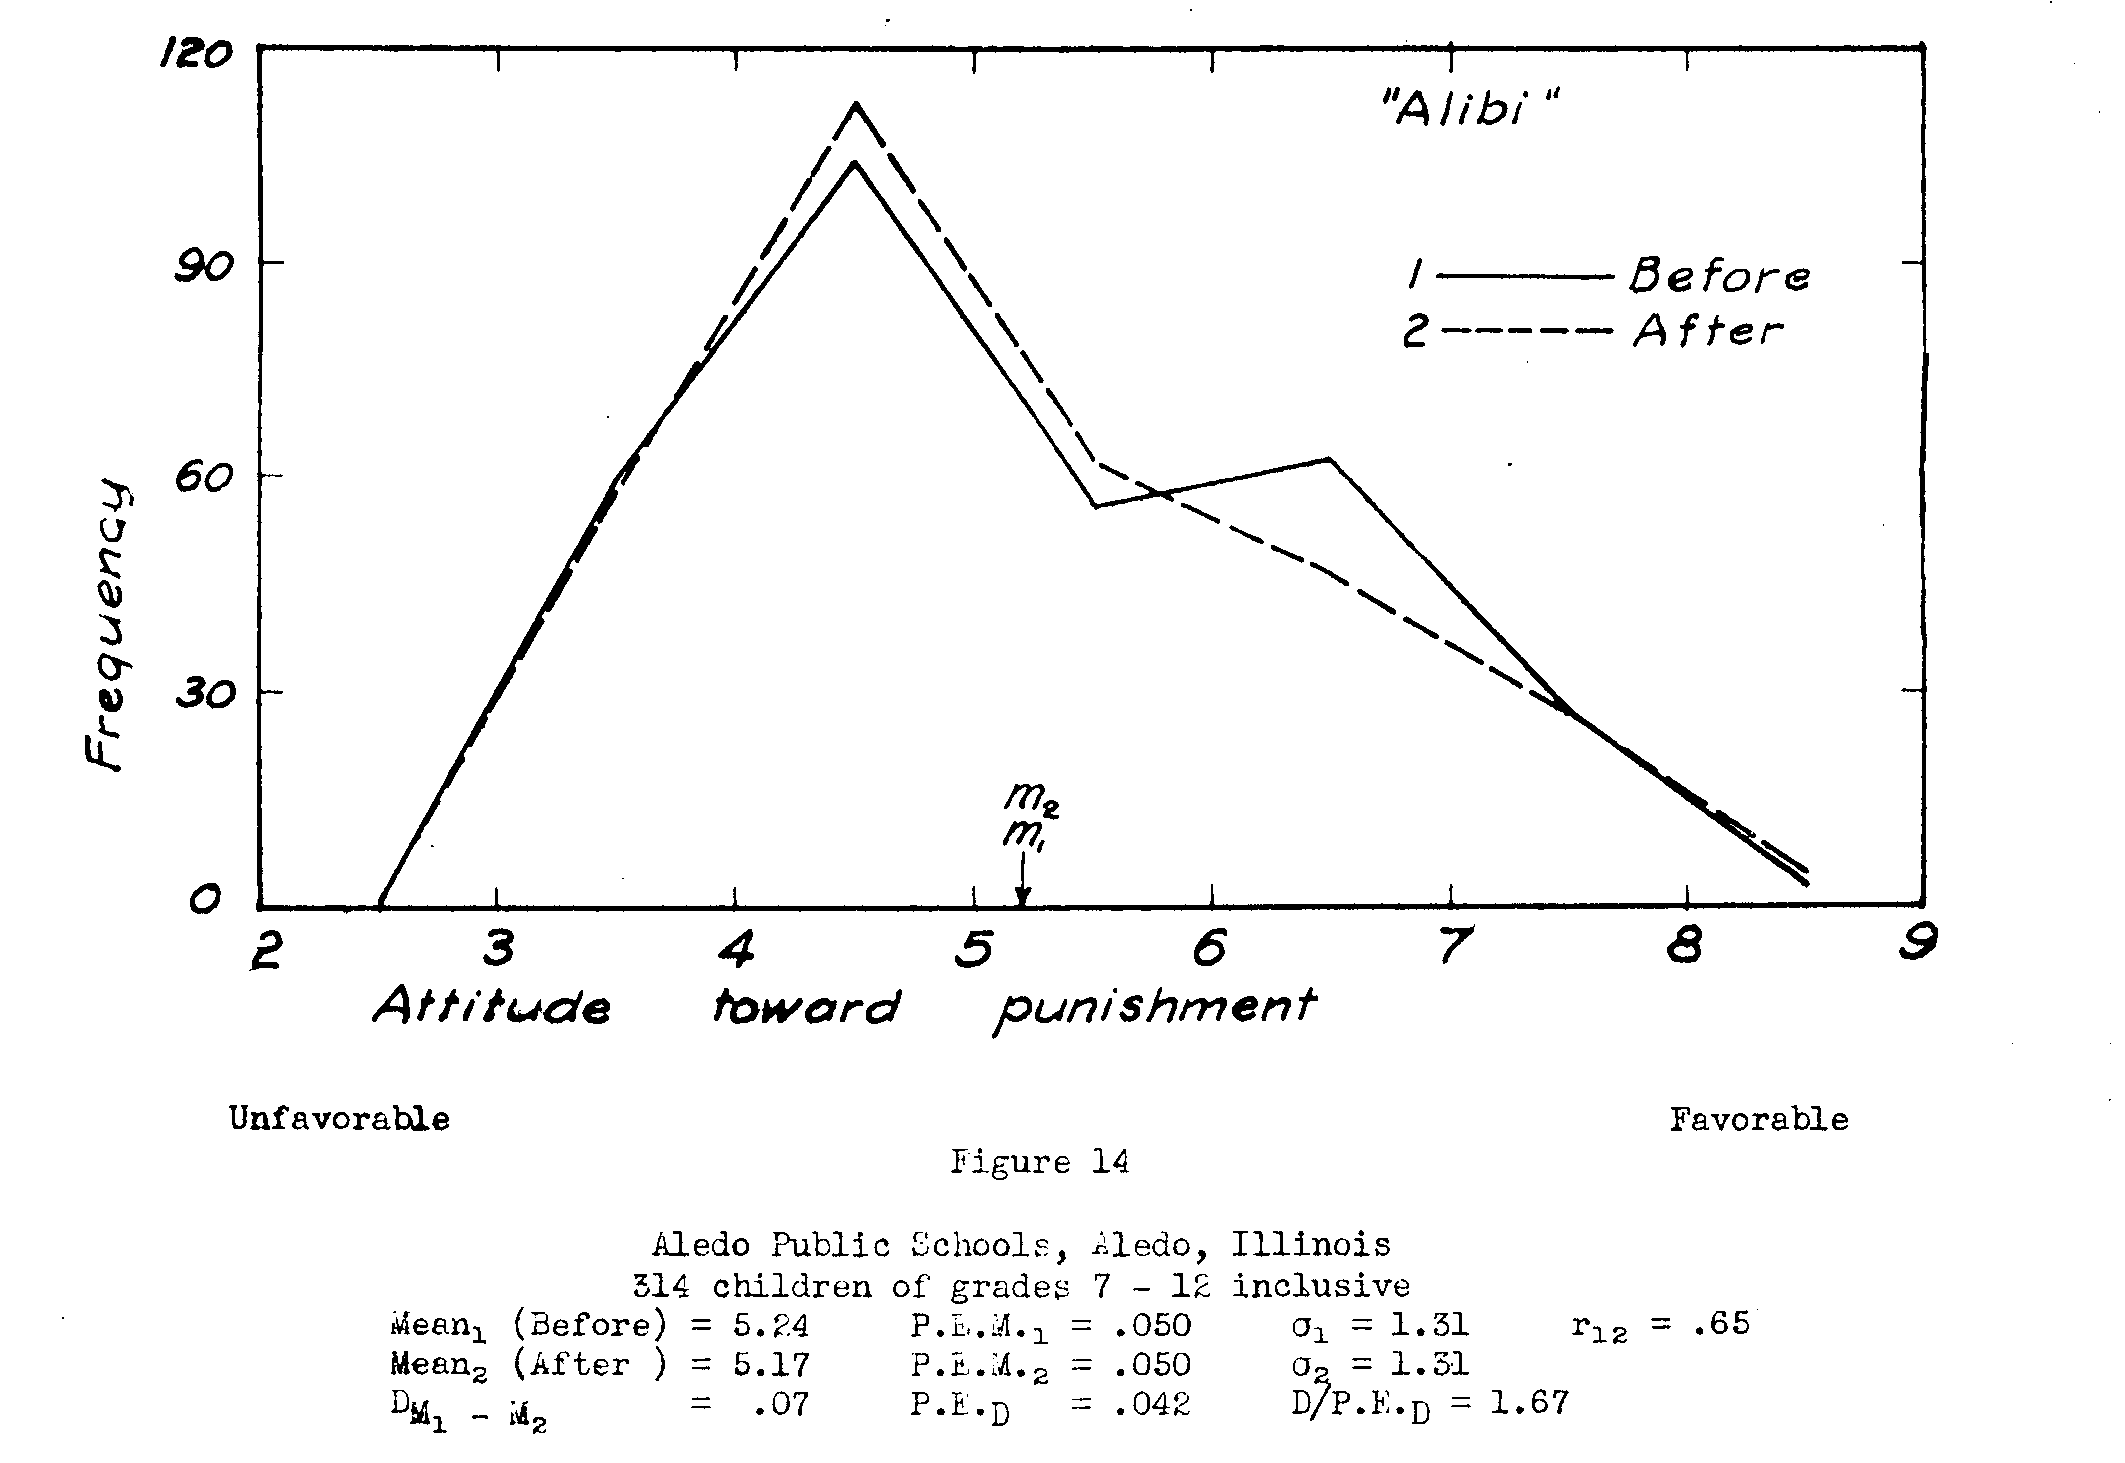 Figure 14, Attitude toward punisment, before and after ALIBI